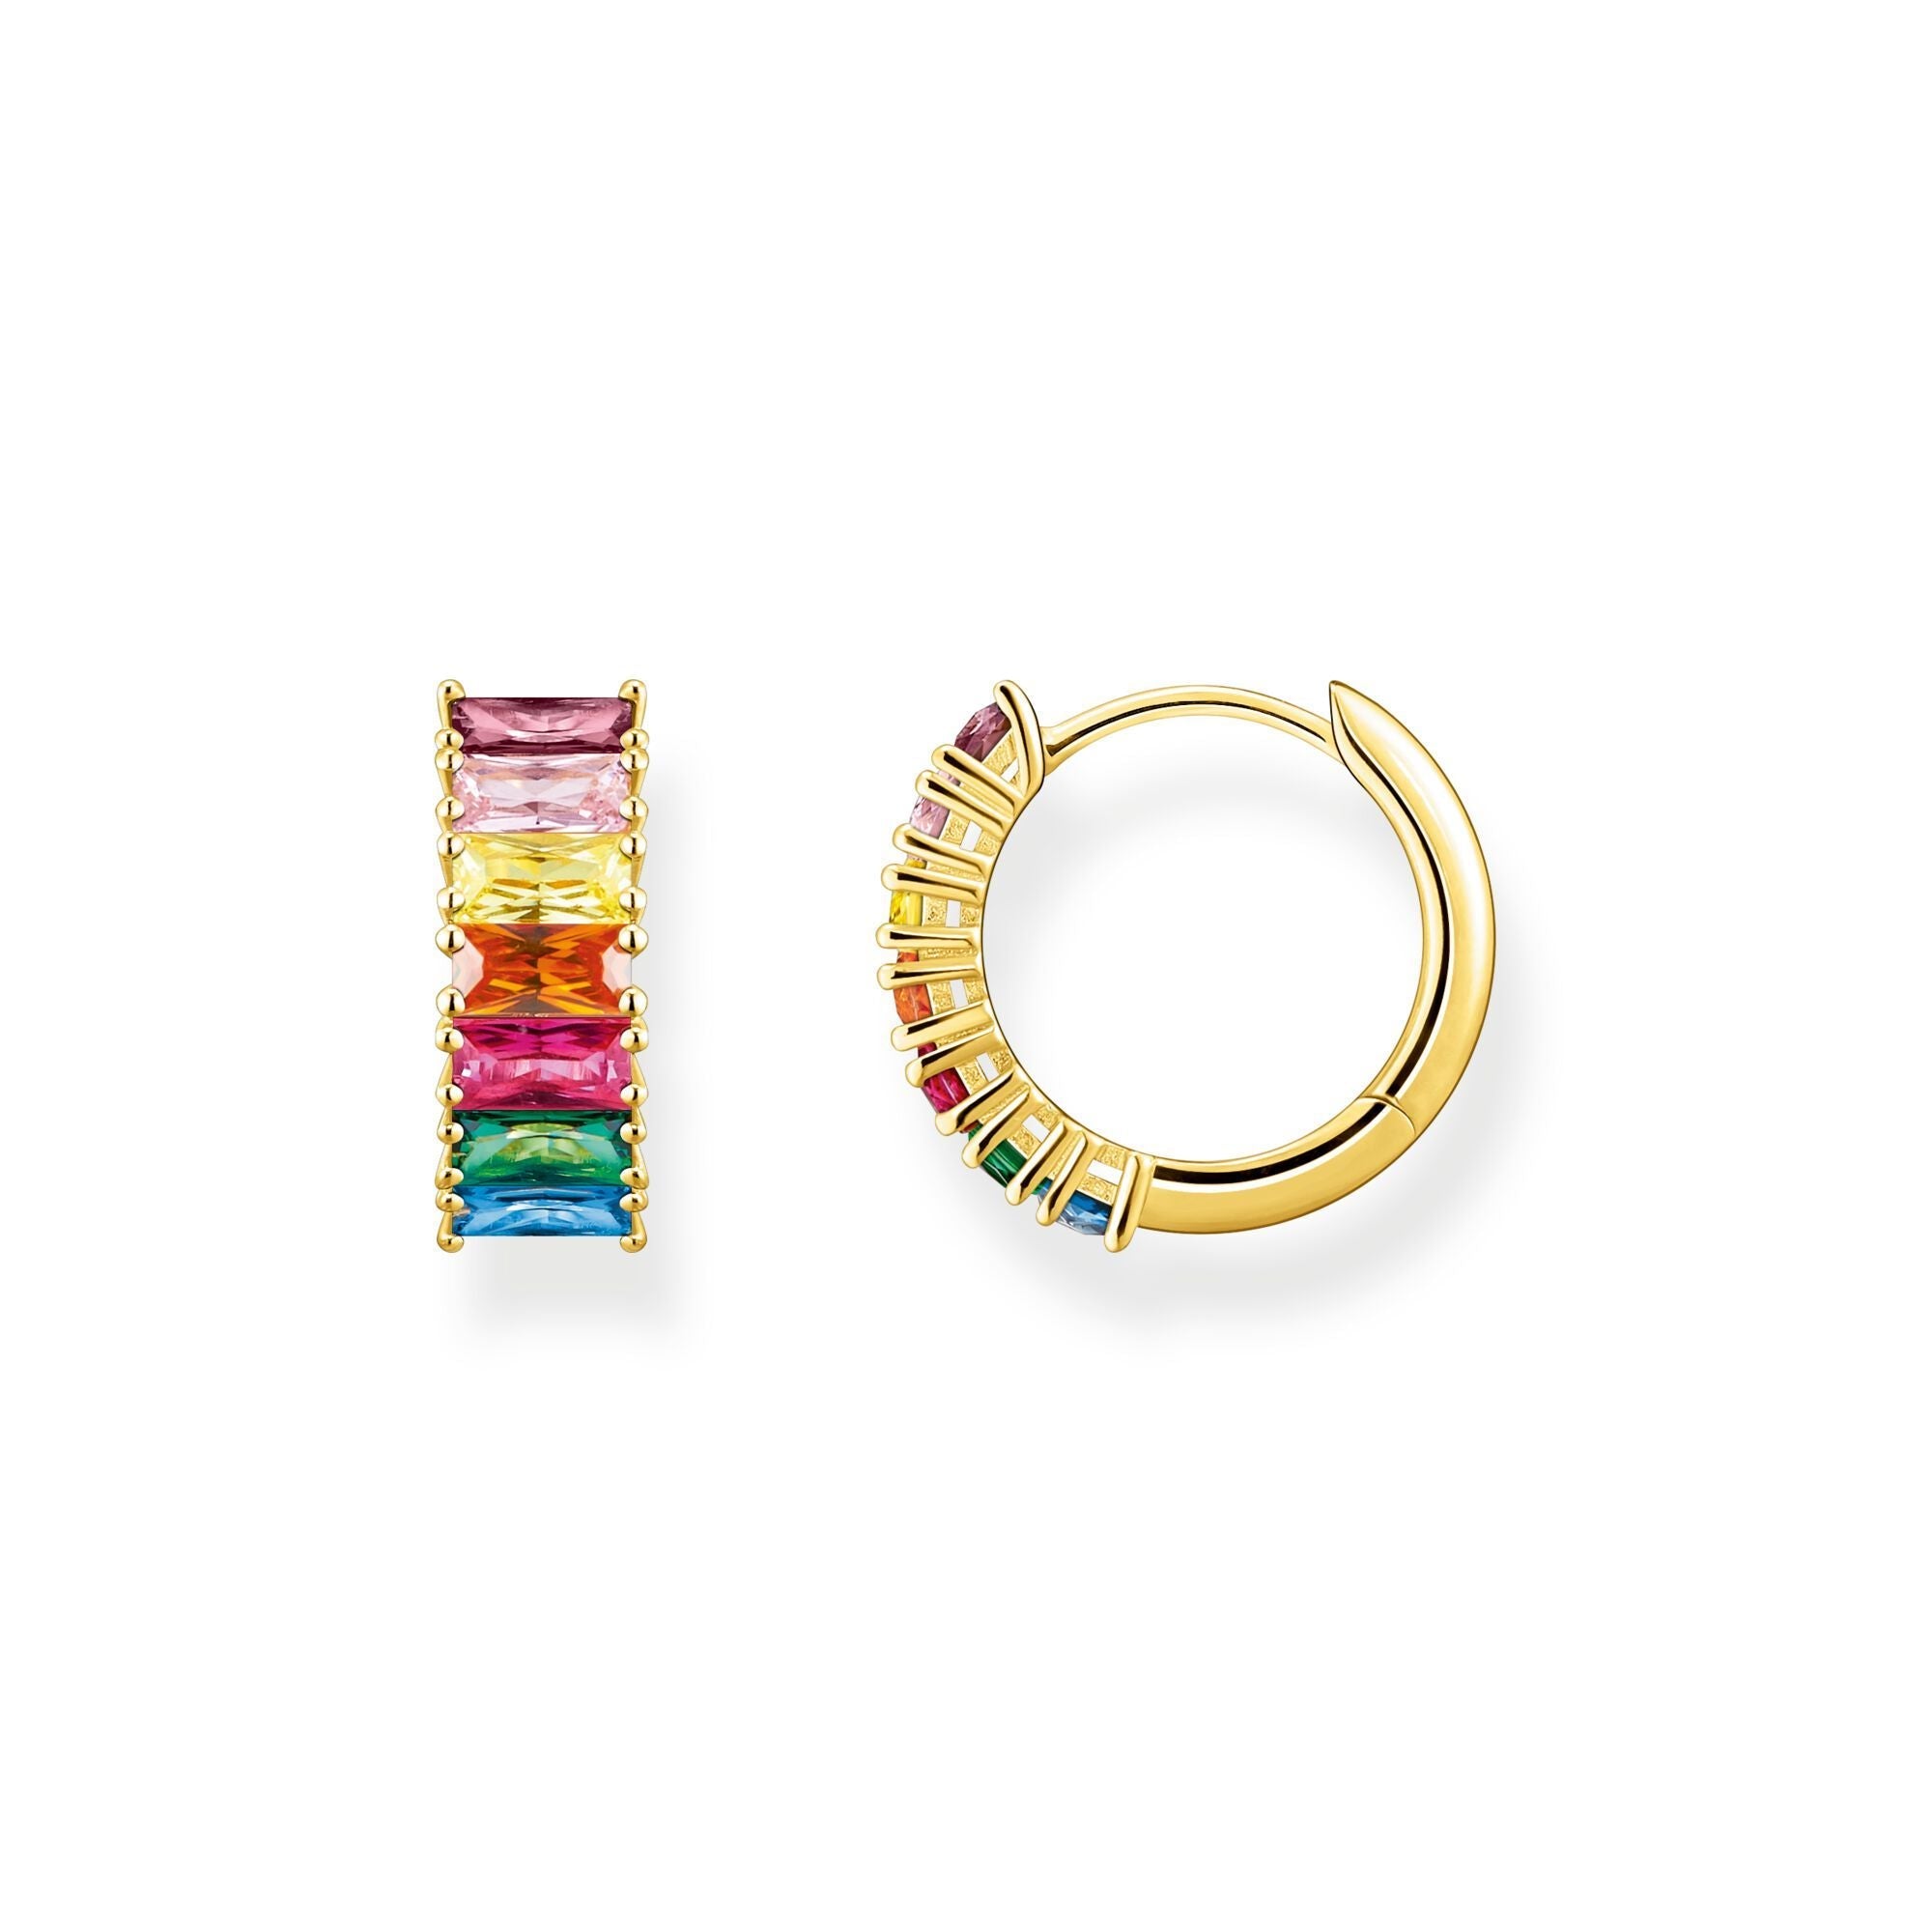 Thomas Sabo Gold Plated Sterling Silver Colourful Stone Hoop Earrings